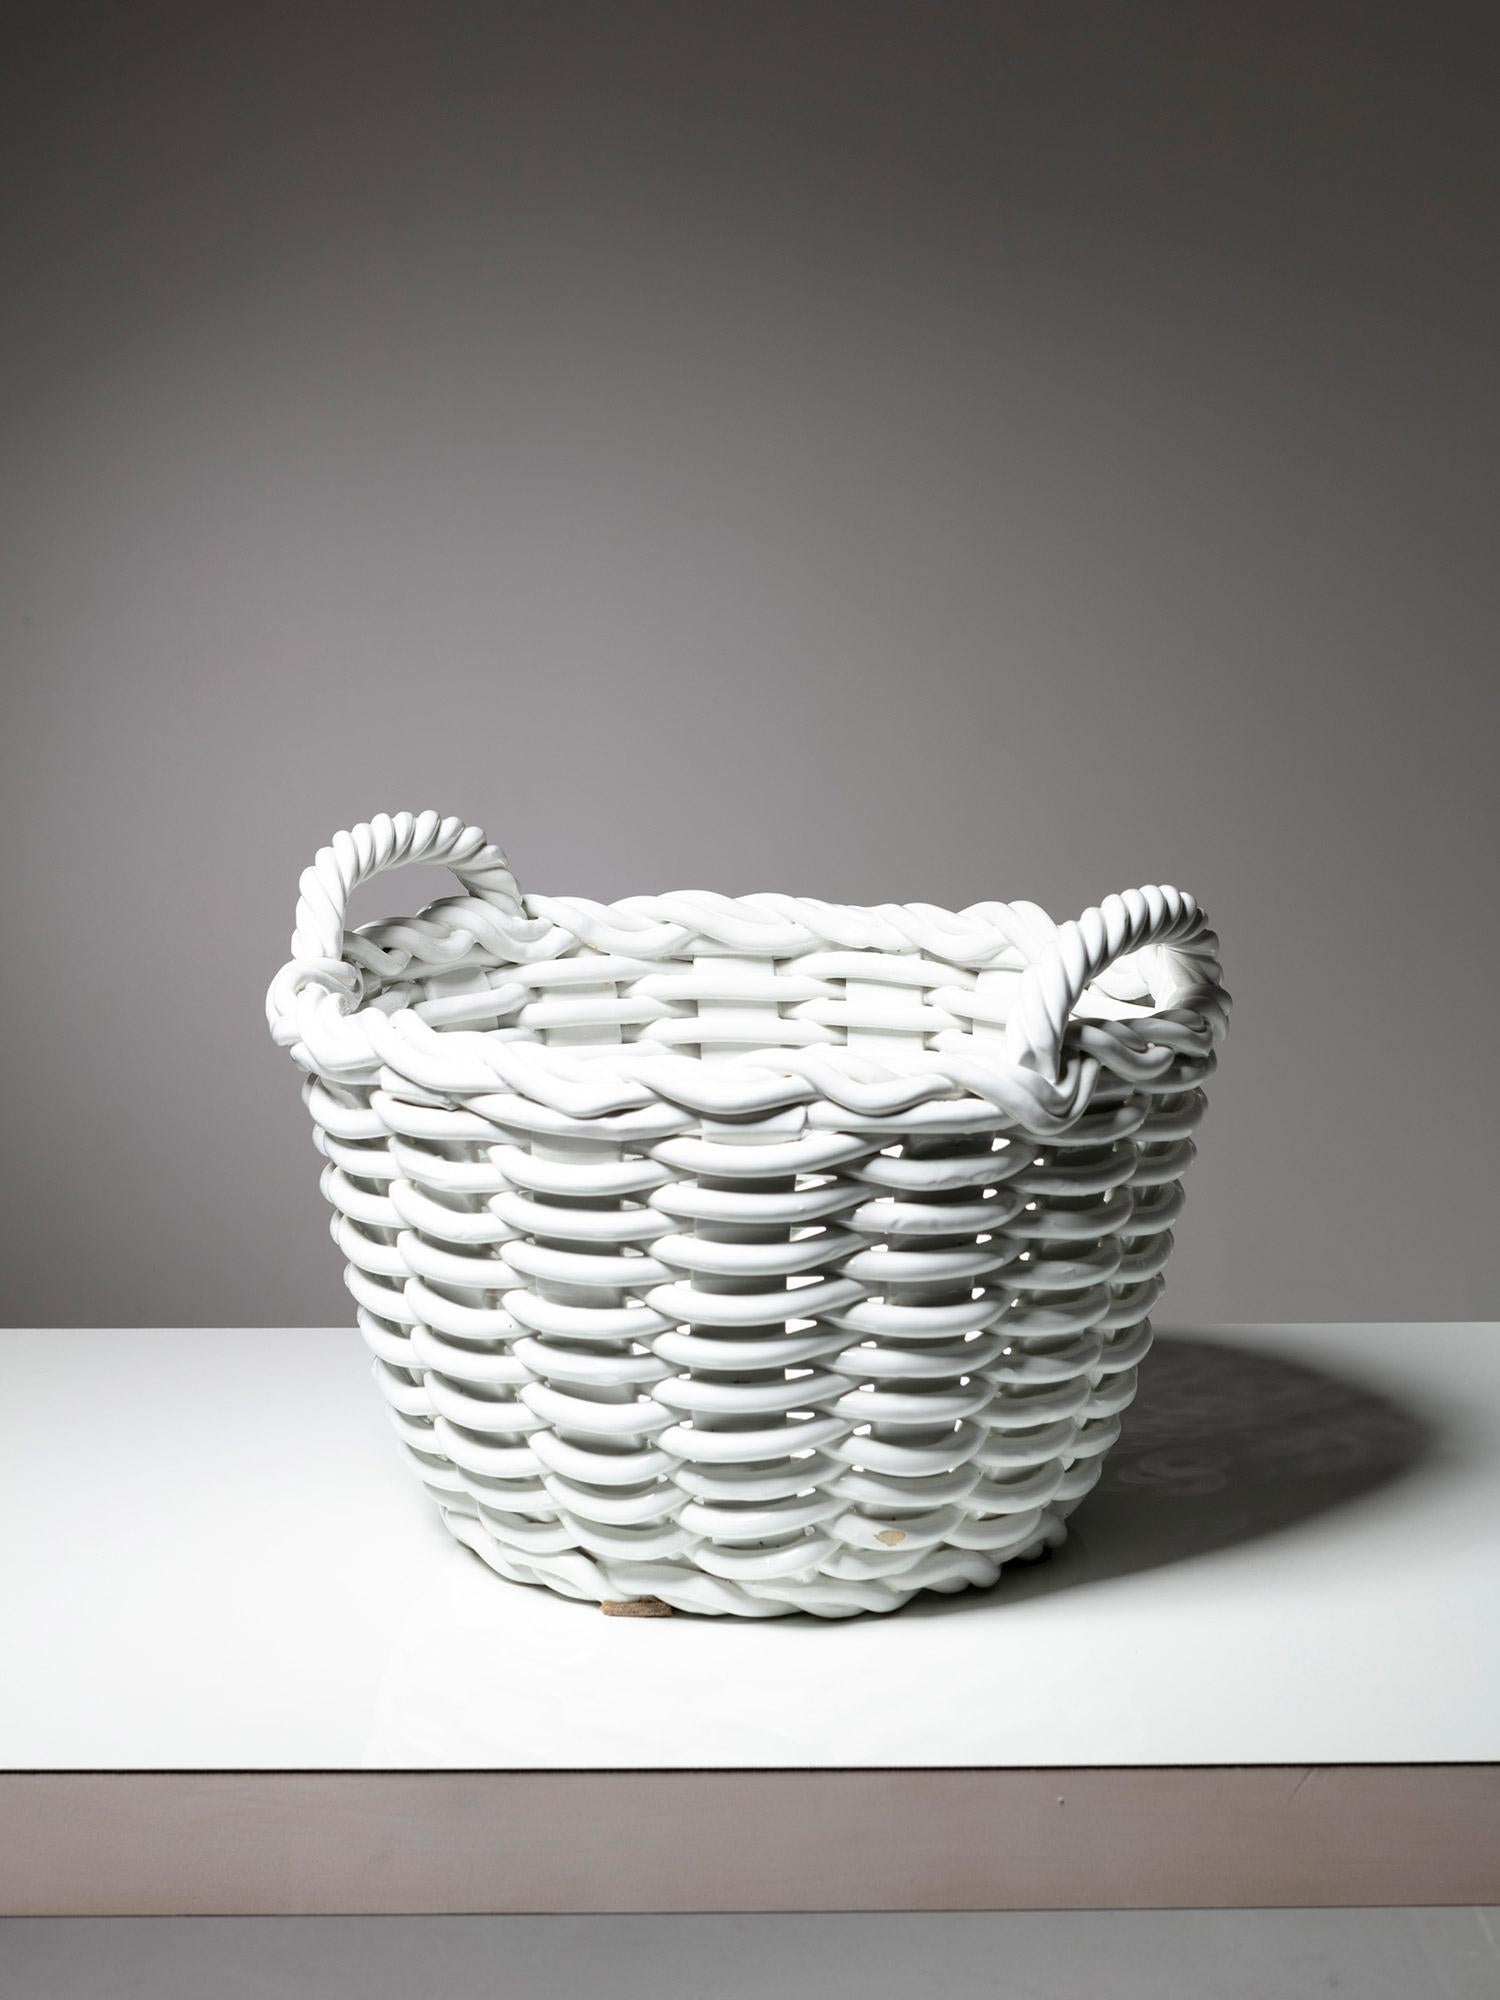 Italian 70s ceramic basket.
Glossy ceramic finish tributes to an functional traditional object.